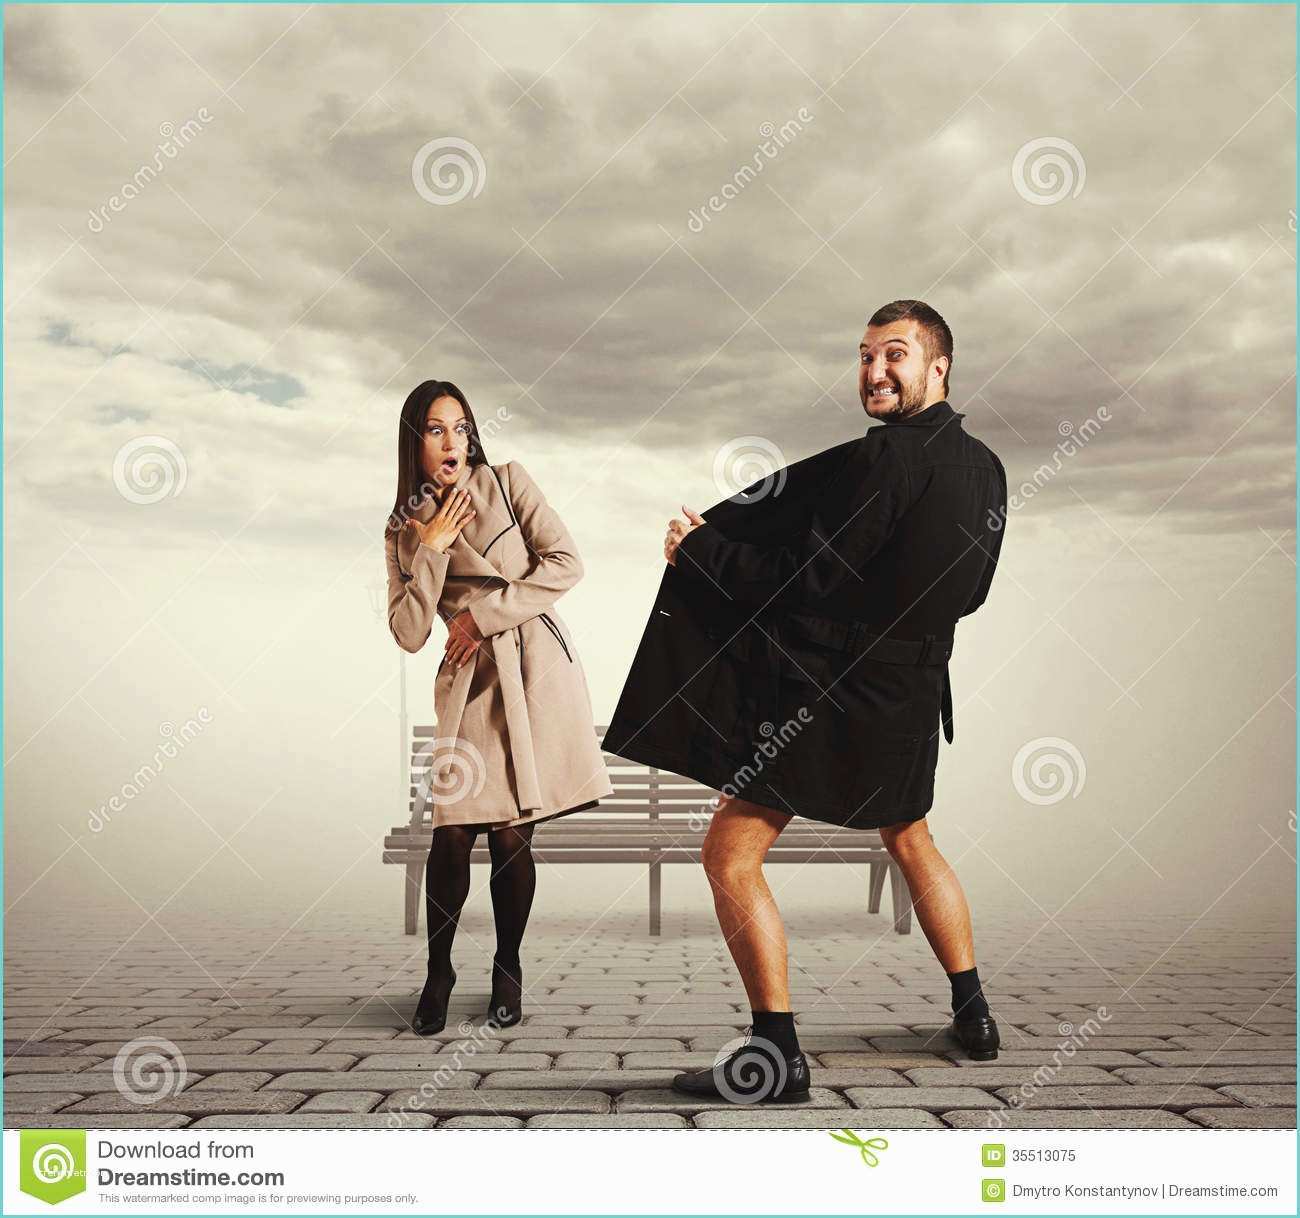 Amnagement Placard Pzenas Young Woman Looking at Crazy Man In Coat Royalty Free